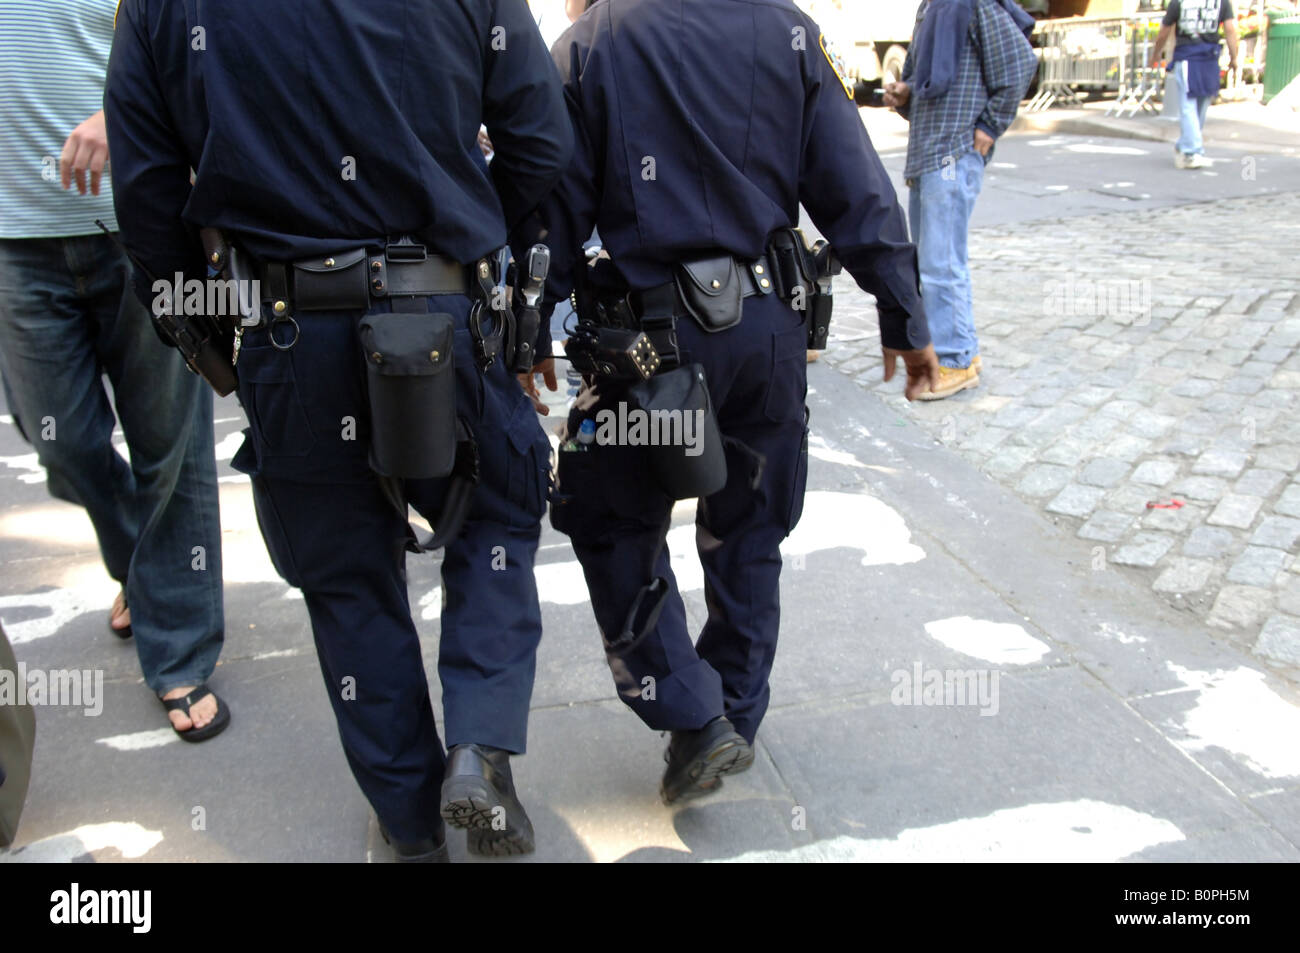 NYPD officers walk near Union Square park in New York carrying considerable equipment on their belts Stock Photo